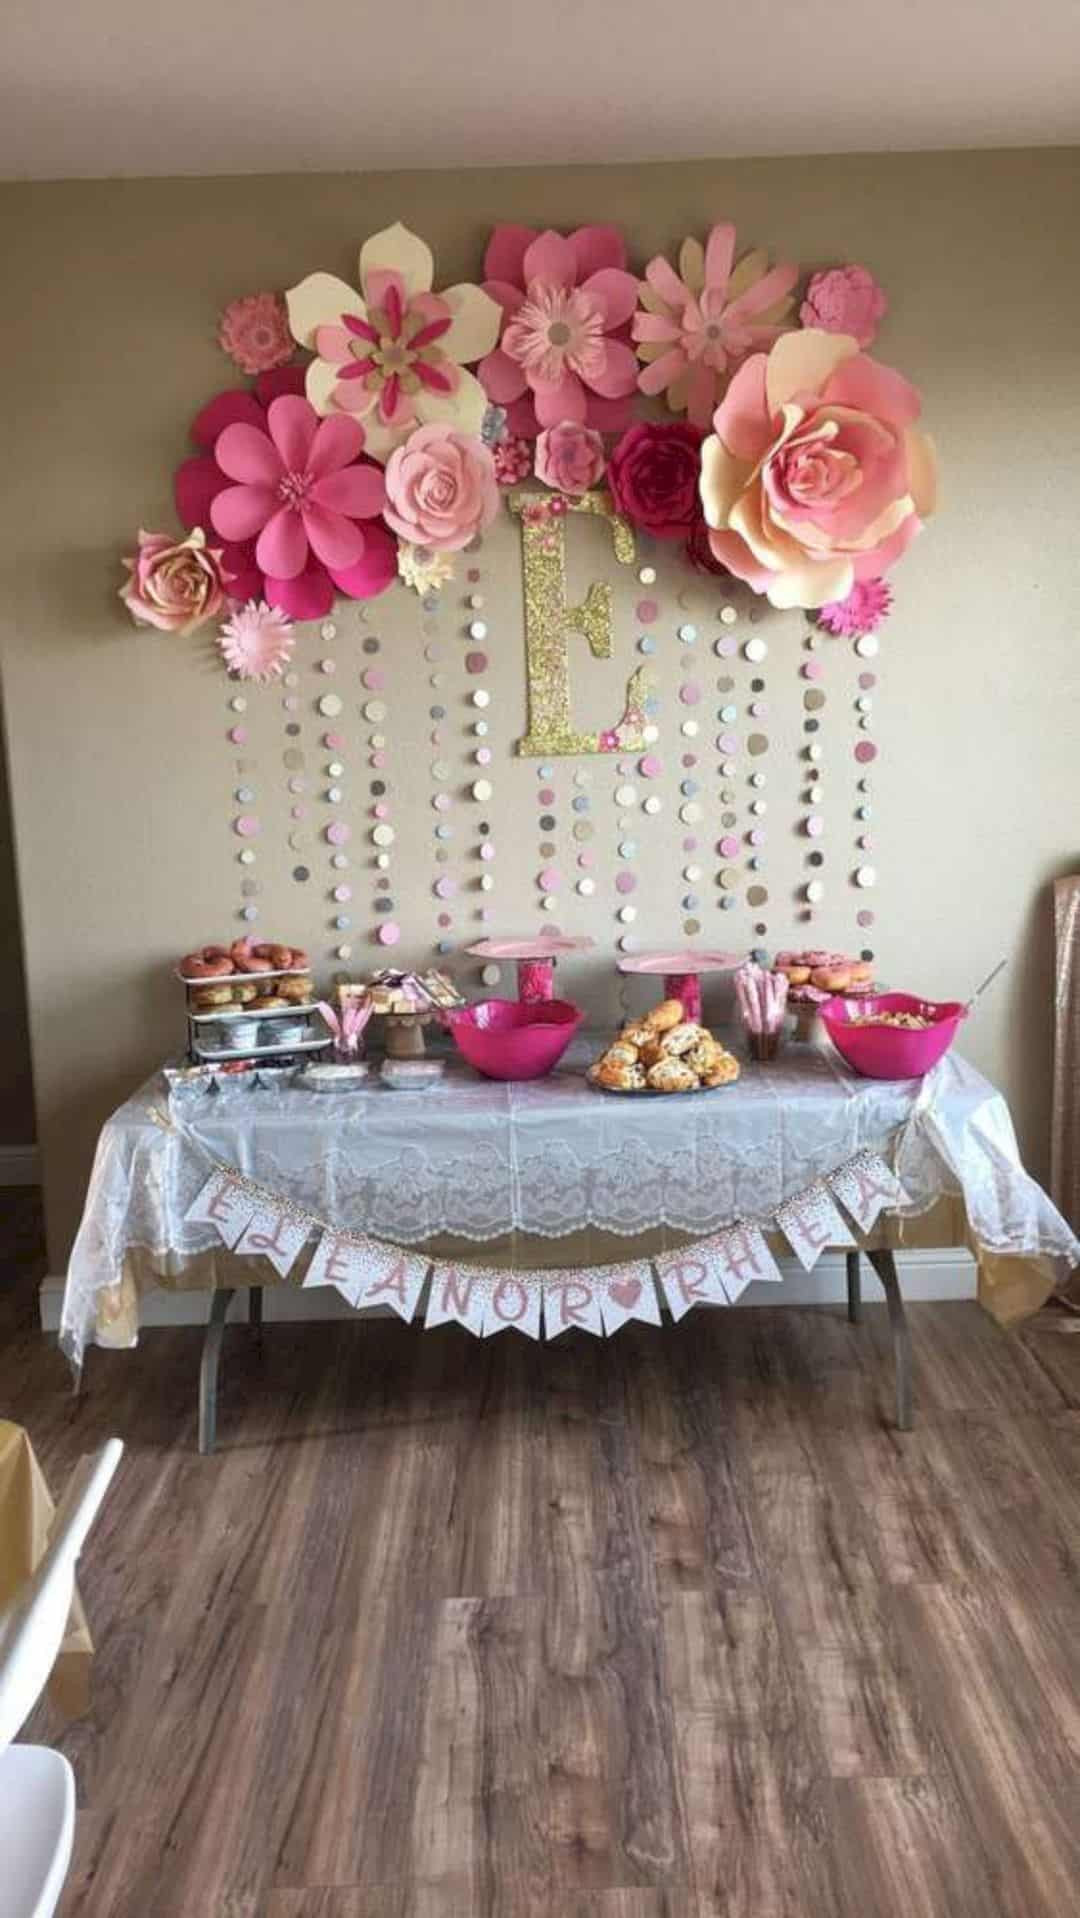 Ideas For Baby Shower Decorations
 16 Cute Baby Shower Decorating Ideas